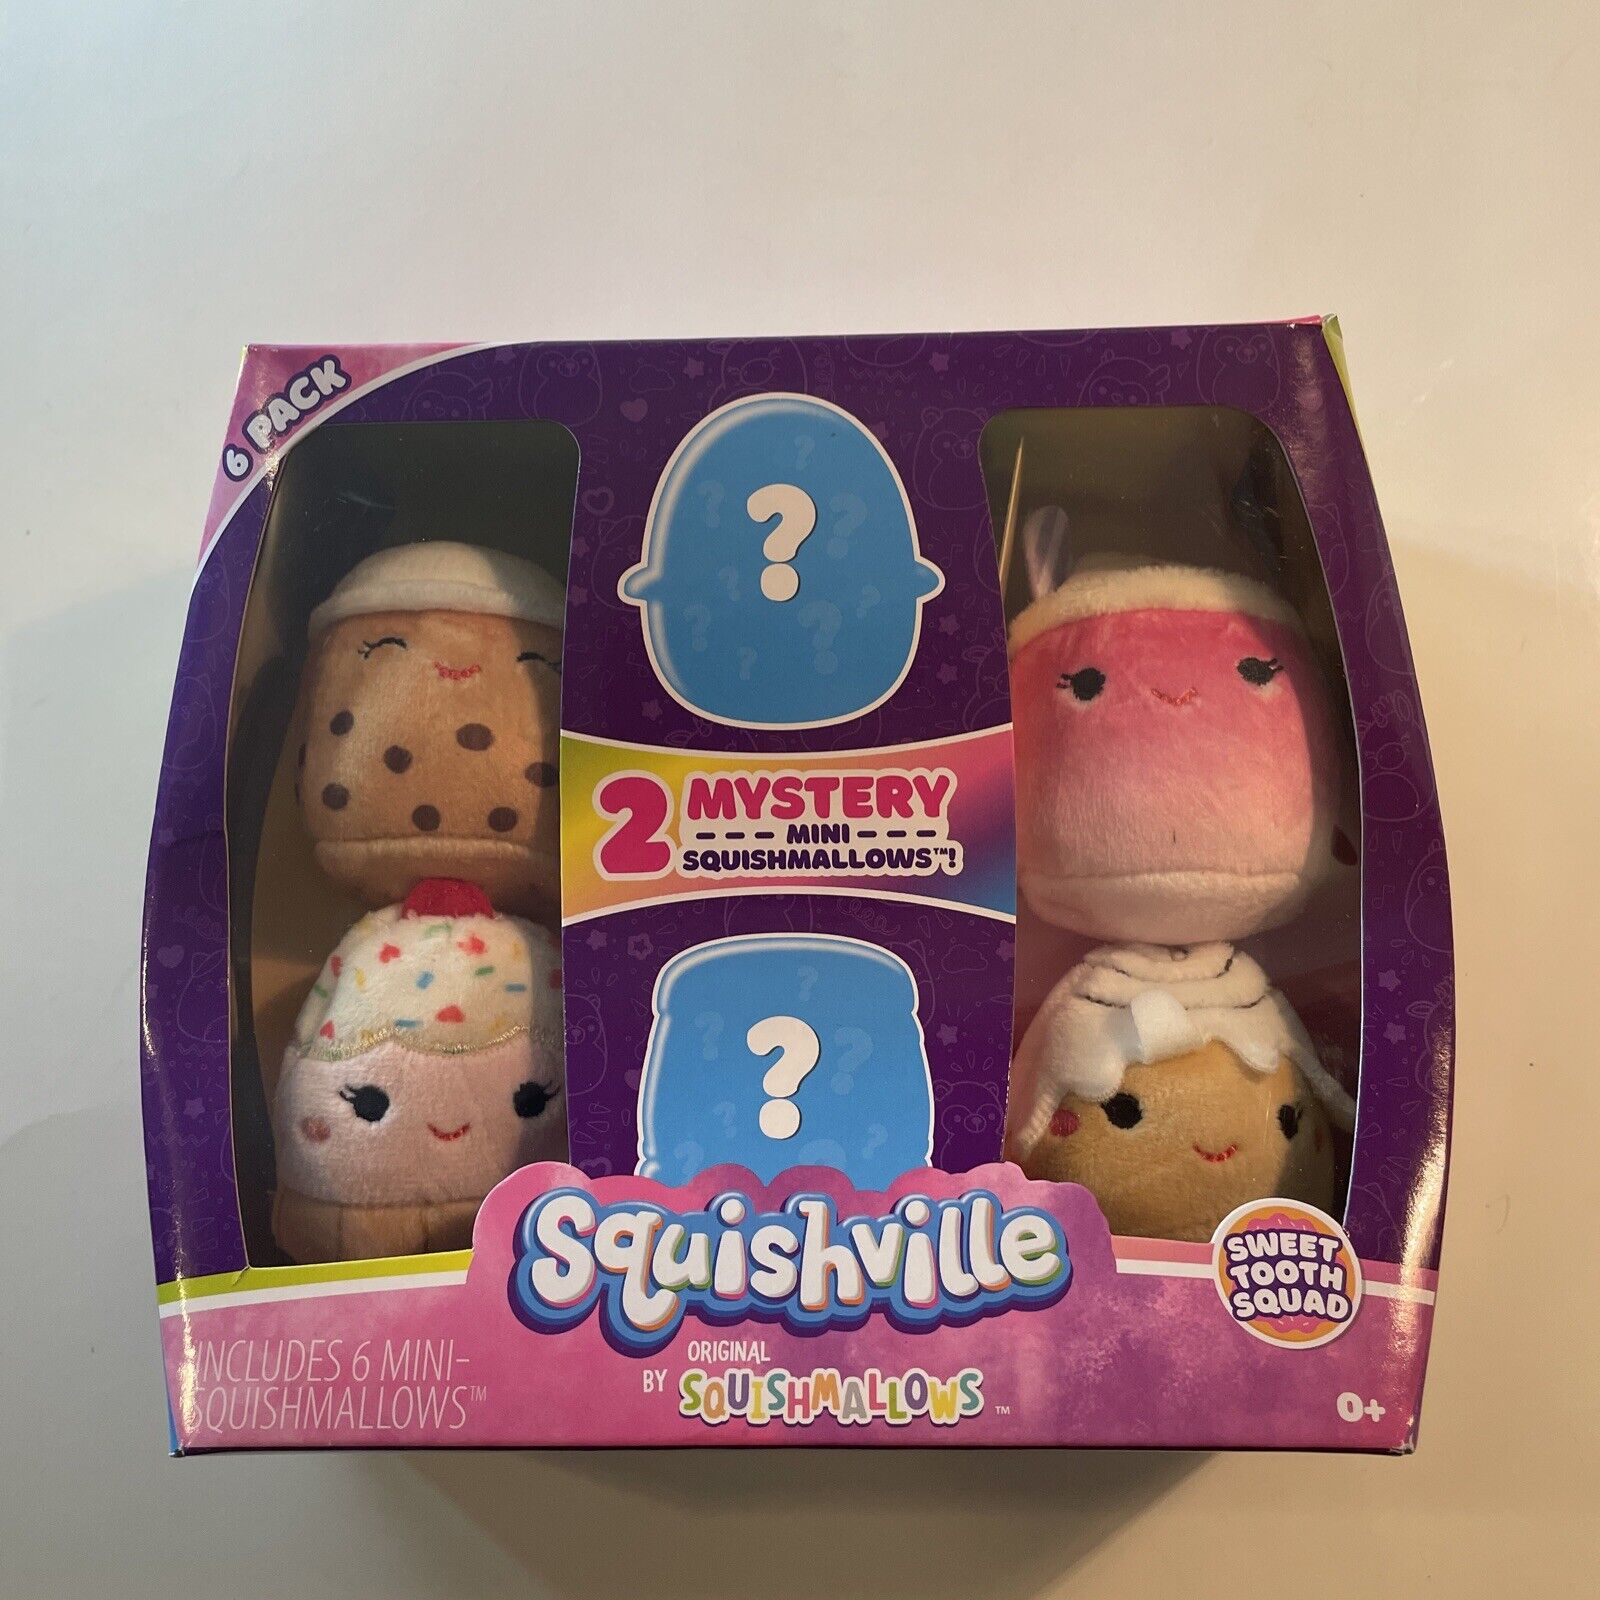 Squishville by Squishmallows 2 inch Mini Plush Sweet Tooth Squad, 6 Pack